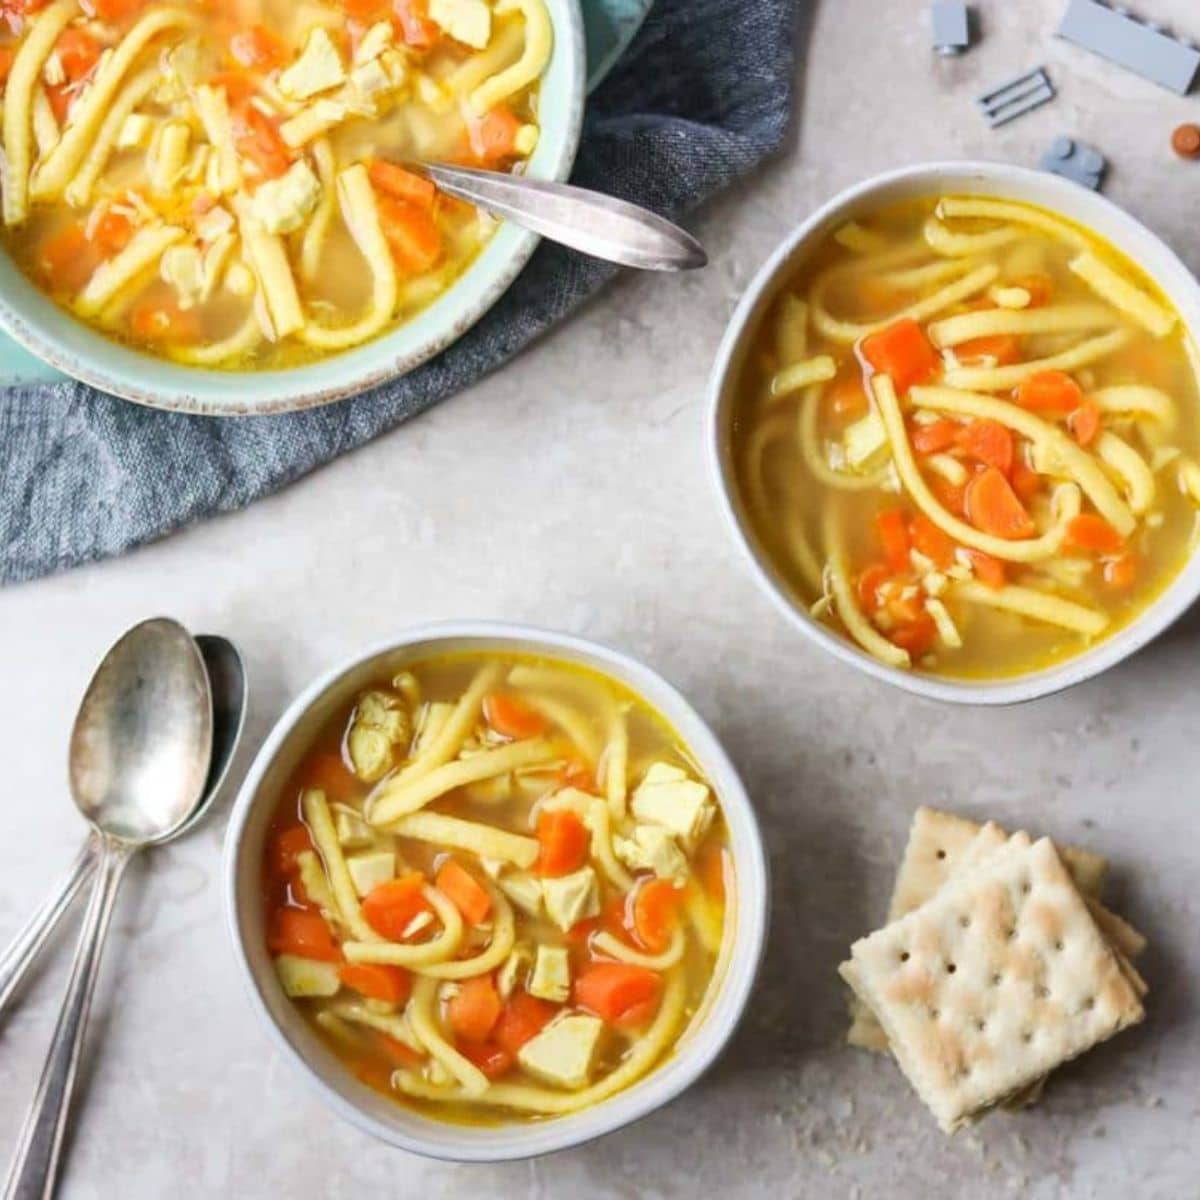 two bowls of chicken noodle soup for kids with legos and crackers around the table